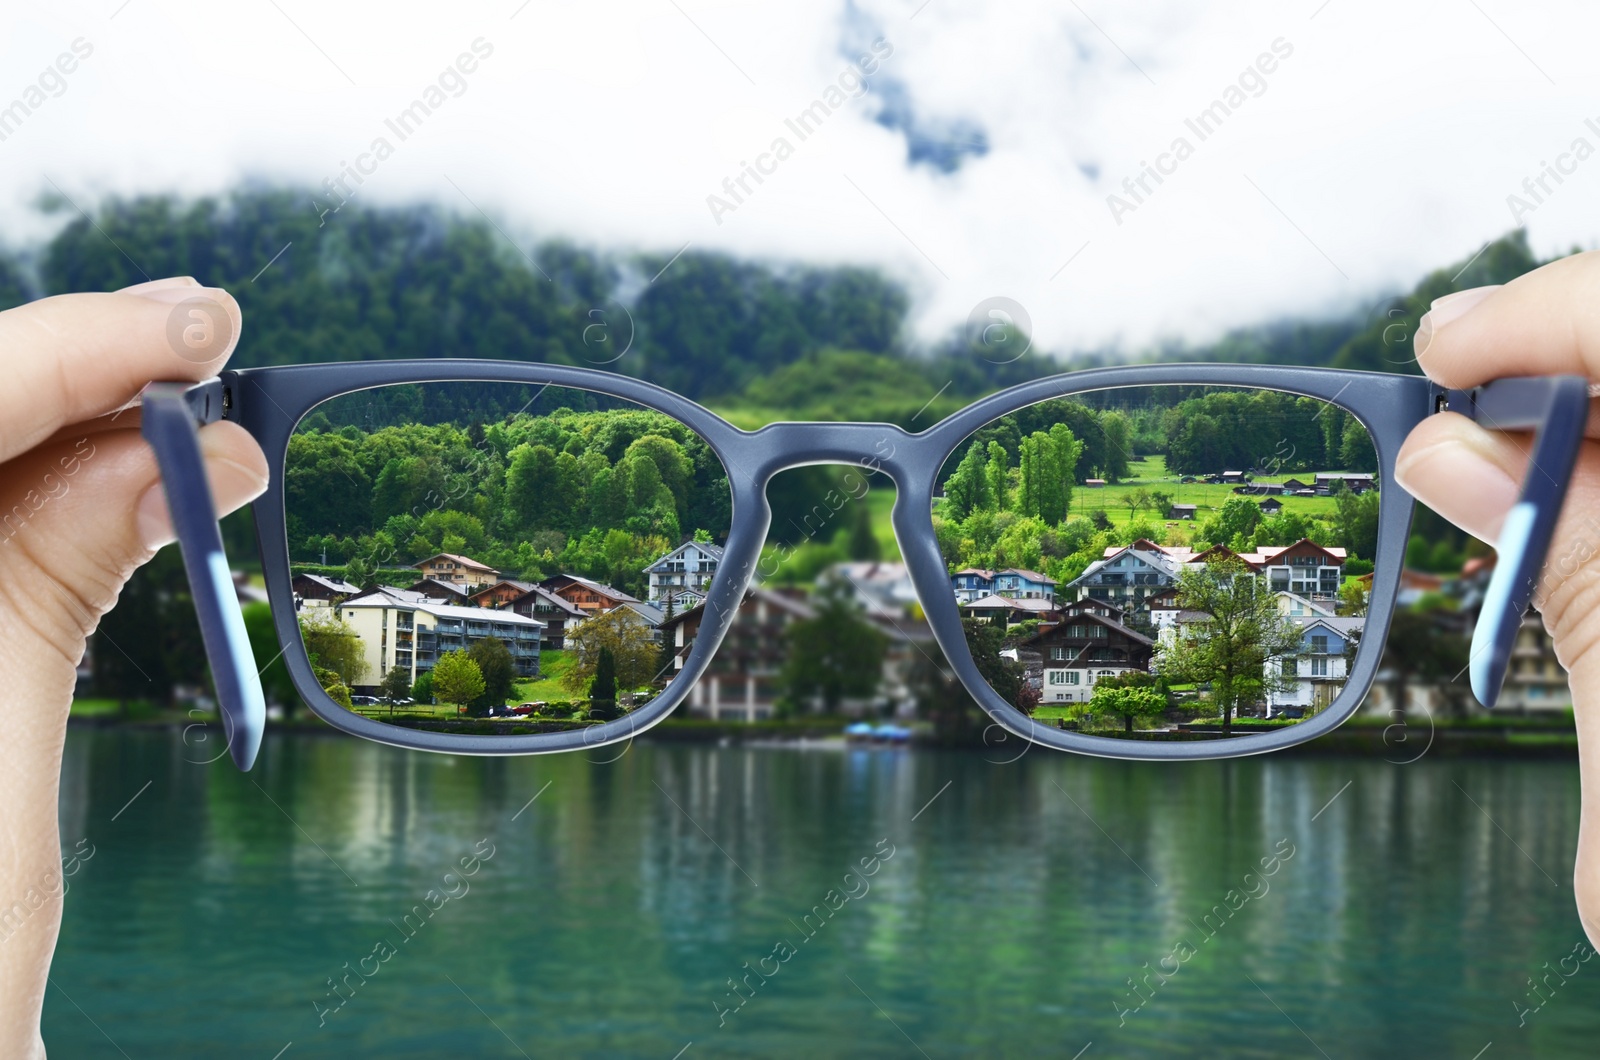 Image of Vision correction. Woman looking through glasses and seeing landscape clearer